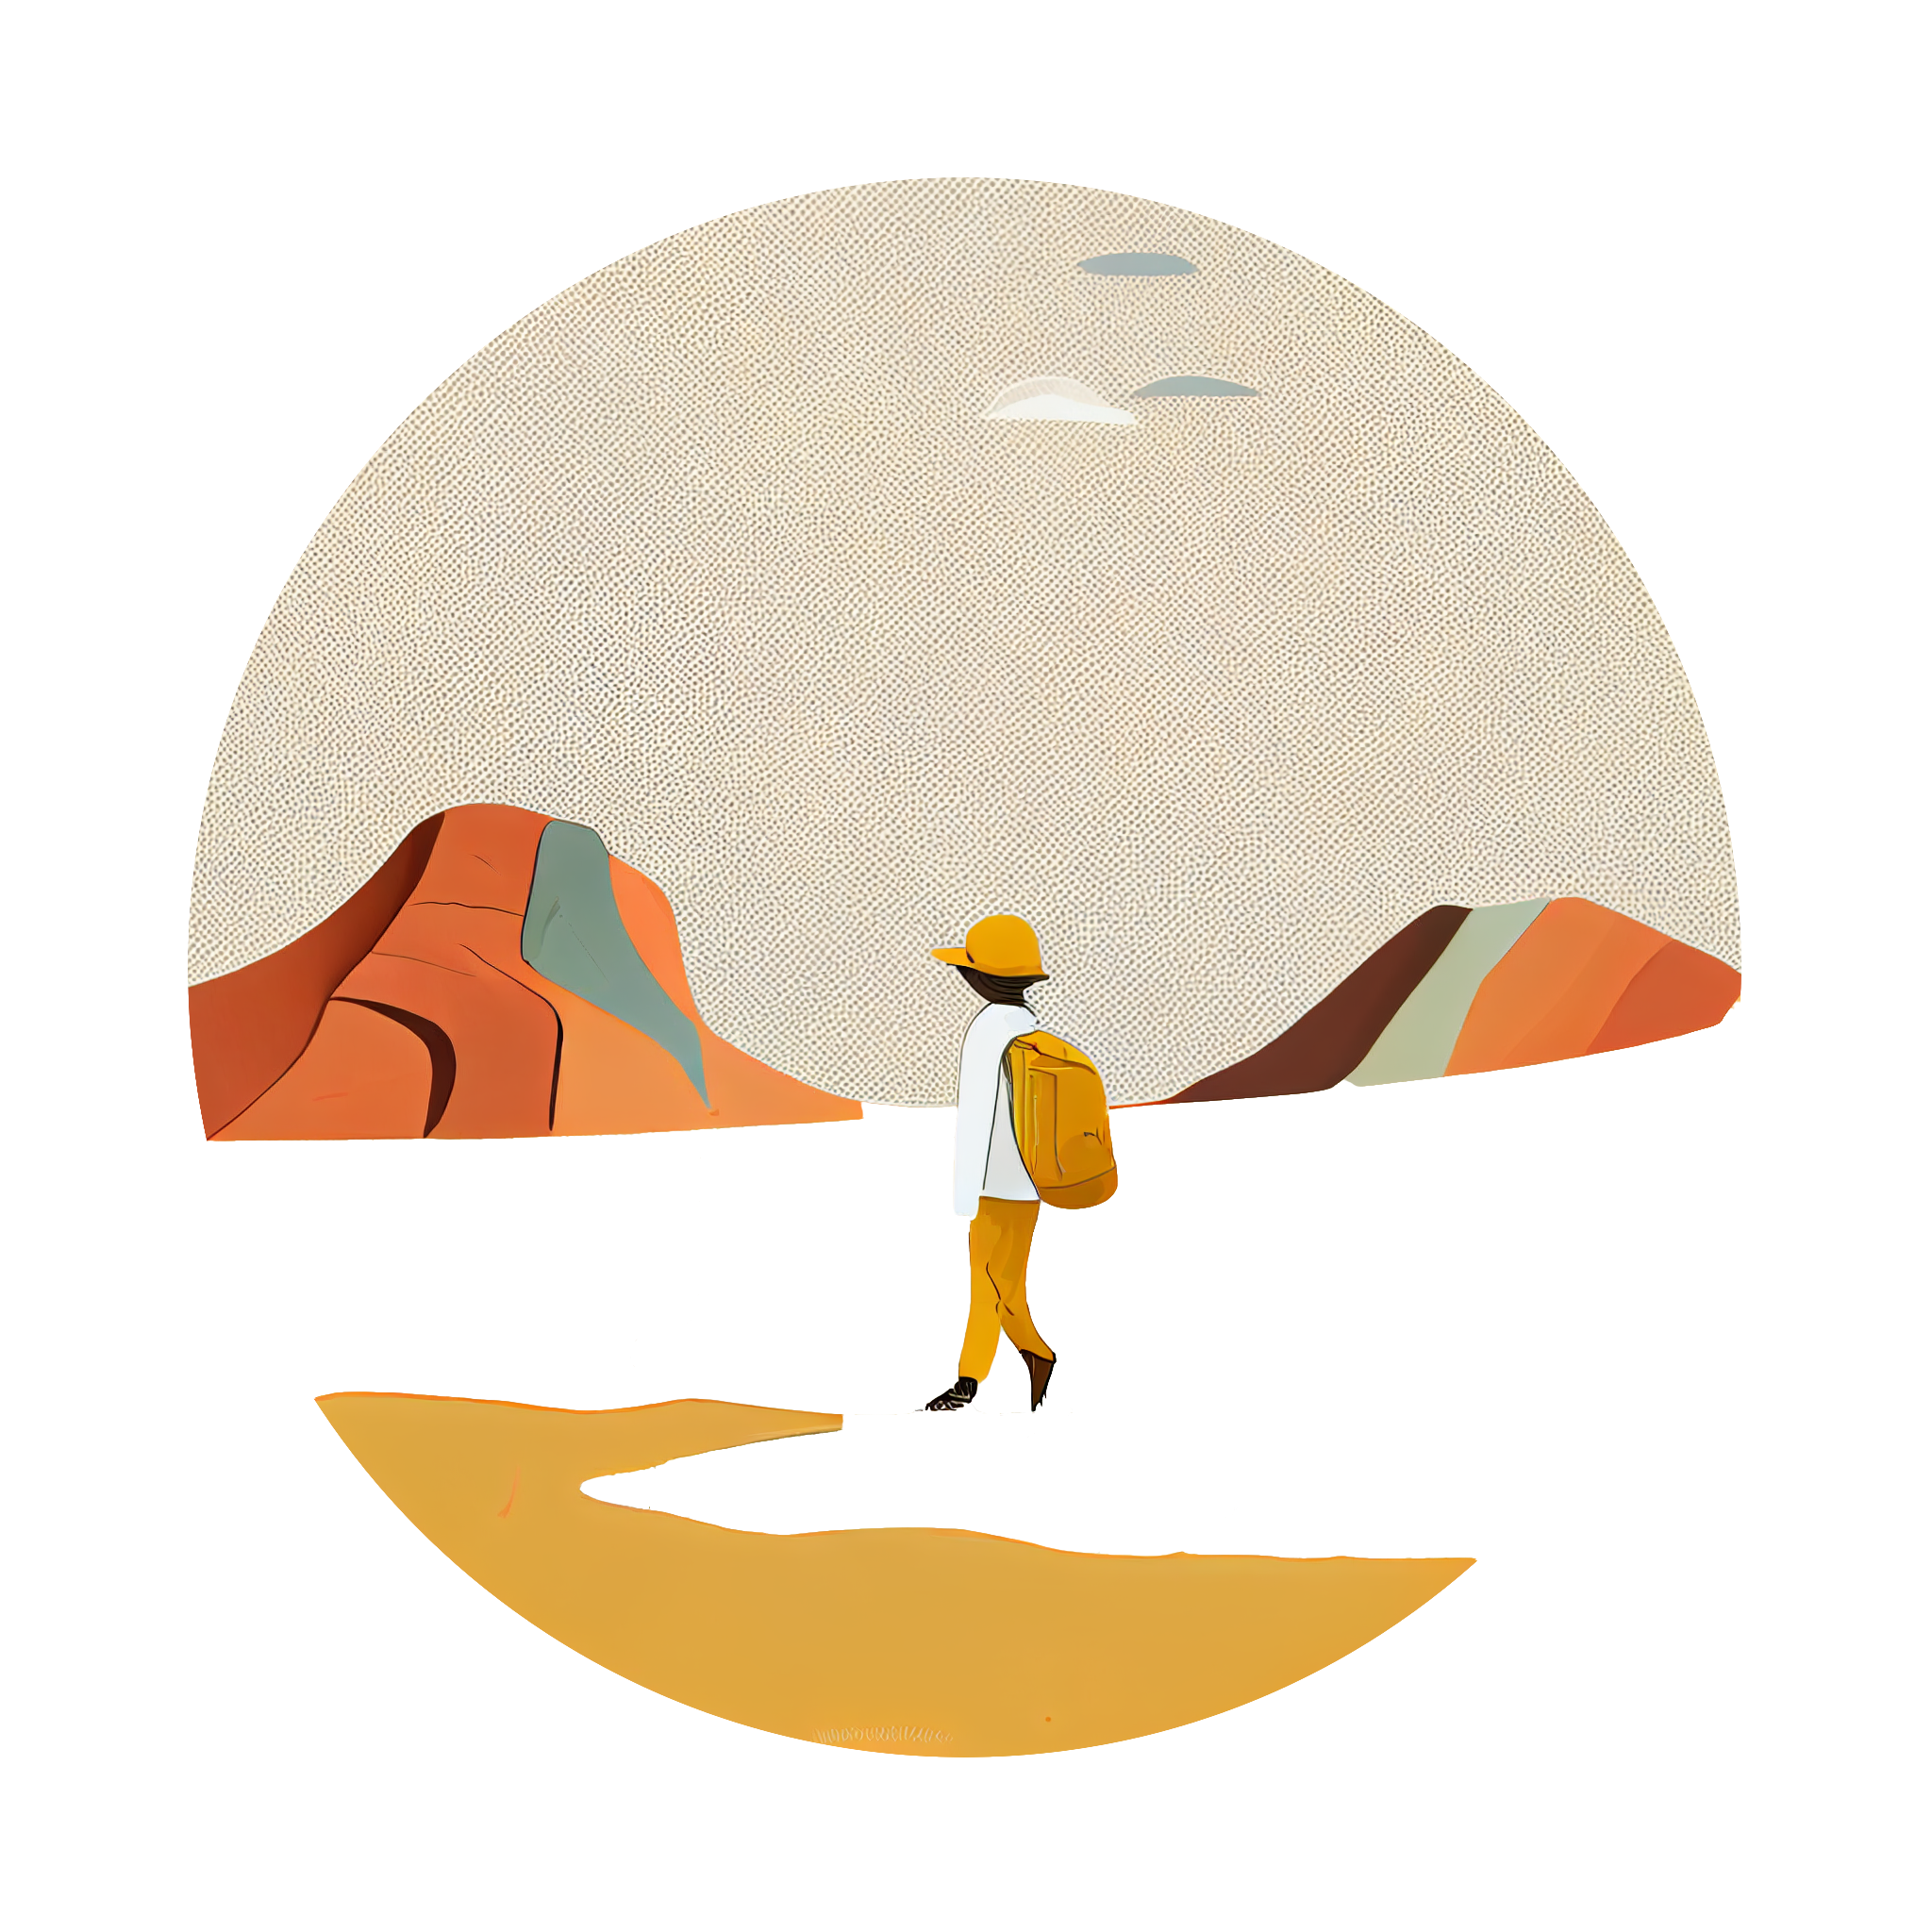 serpico_minimalist_and_abstract_illustration_of_solo_traveler_a_2d184681-7792-4f25-8cf0-238c53f99c34 (1).png